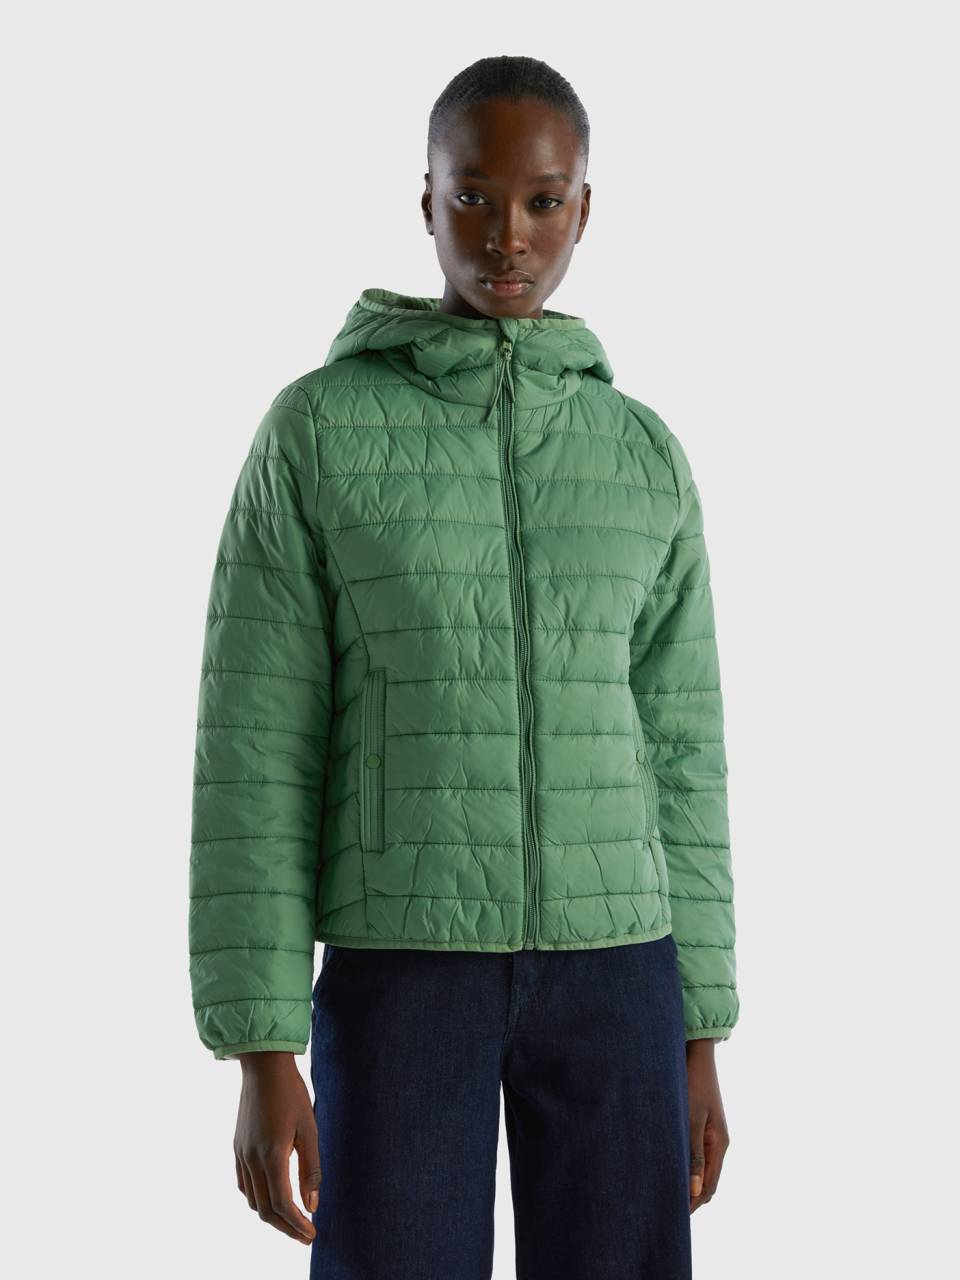 Benetton puffer jacket with recycled wadding - 2twddn024_2k7